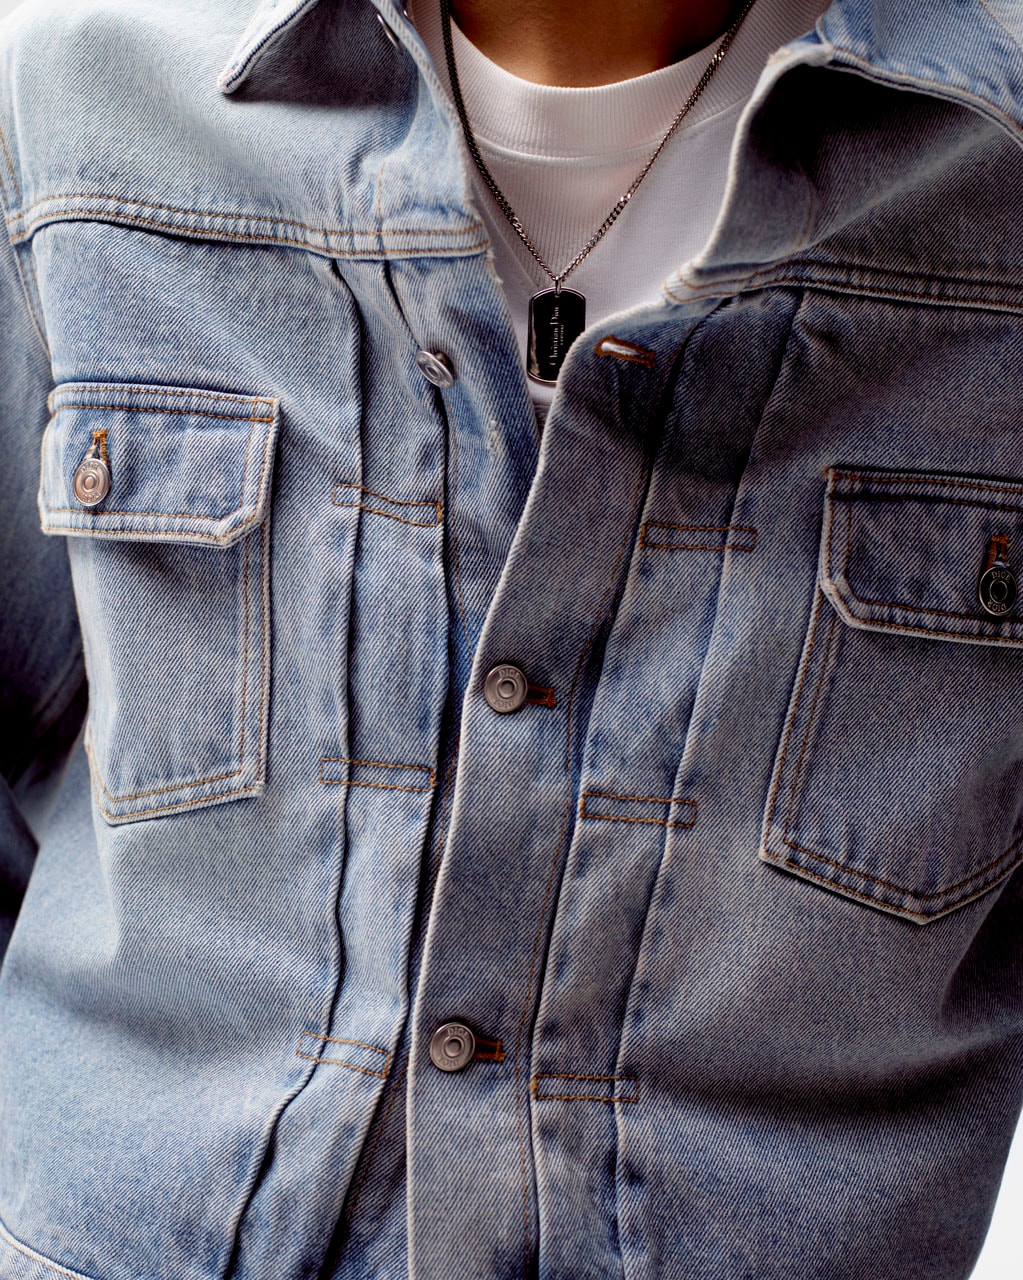 Dior Men's Delivers First Denim Capsule Collection Release Info